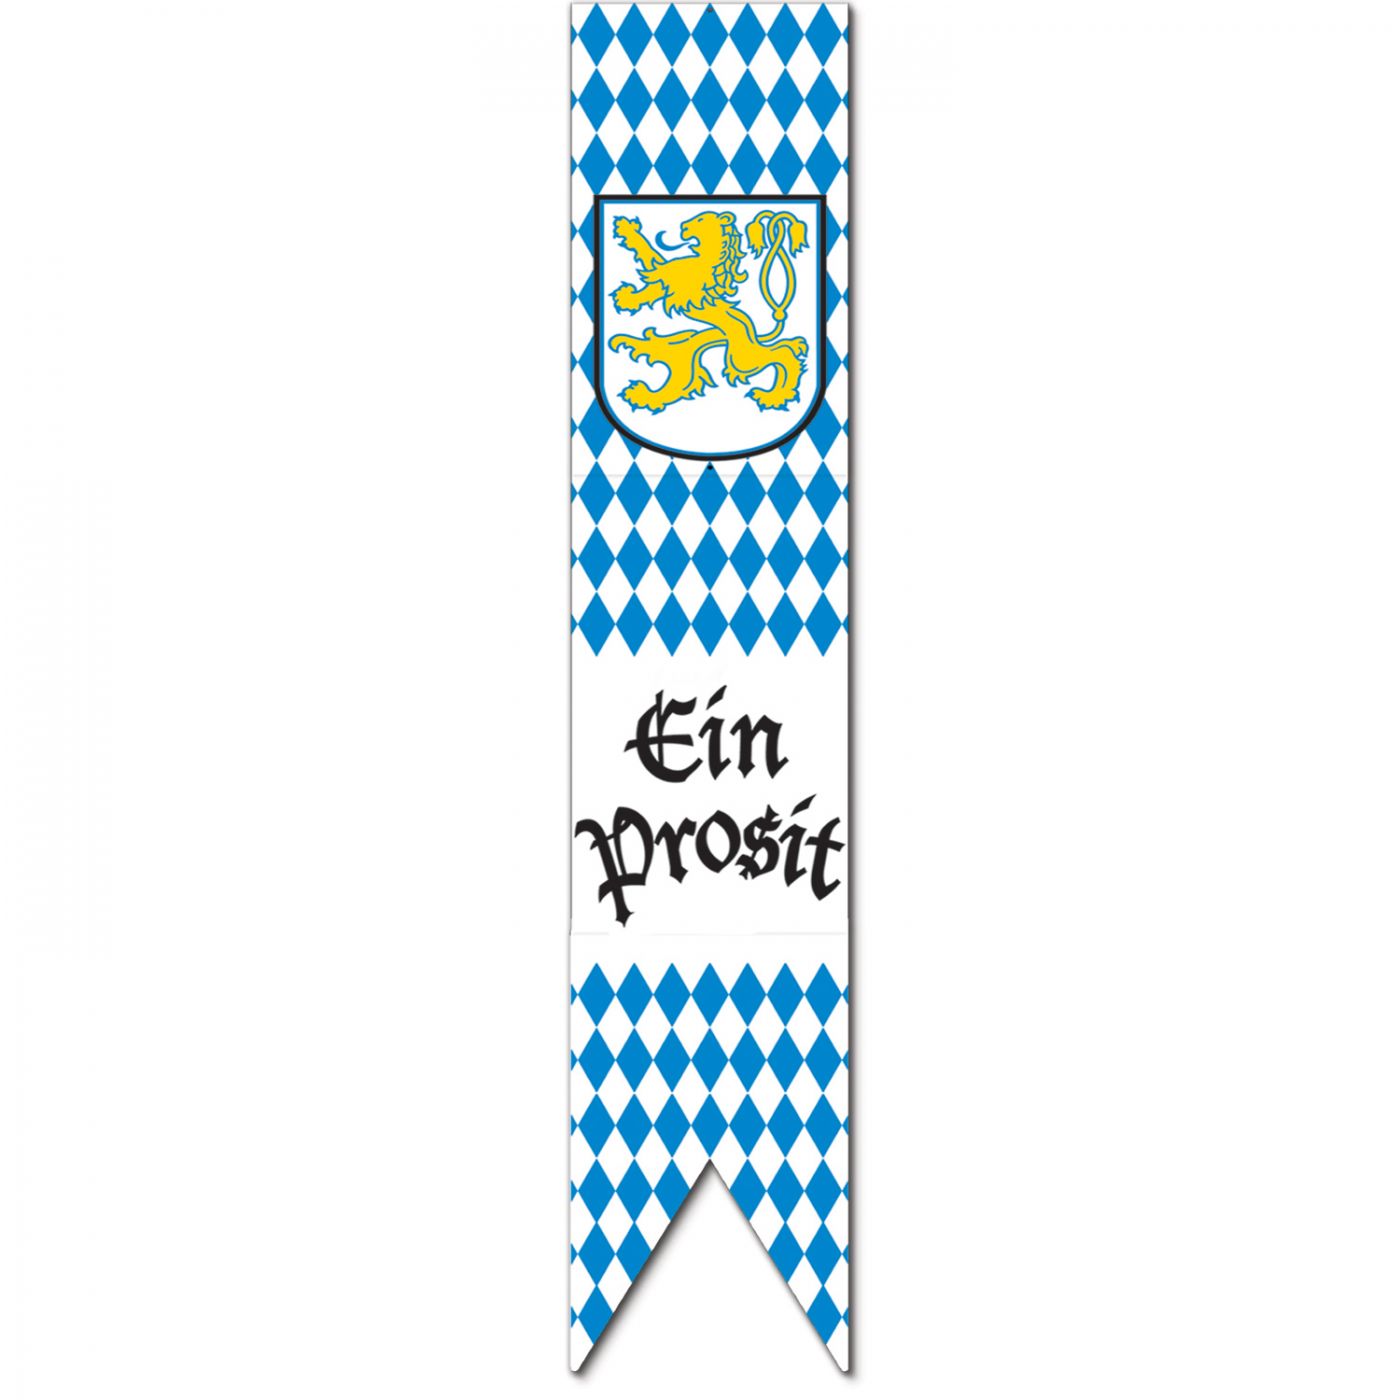 Jointed Oktoberfest Pull-Down Cutout (12) image